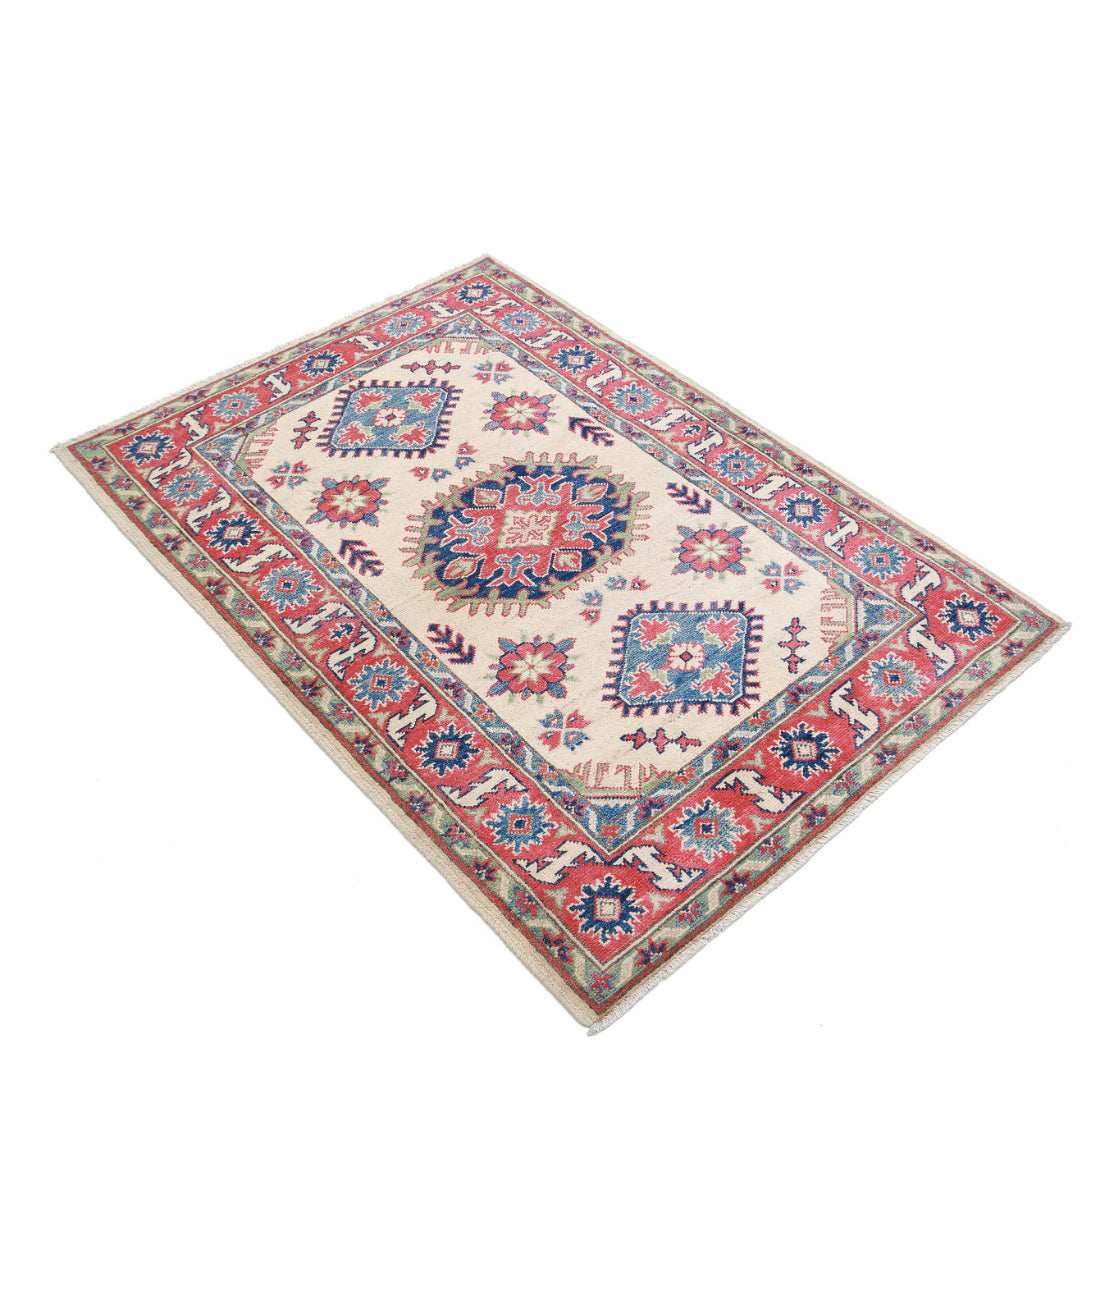 Hand Knotted Tribal Kazak Wool Rug - 3'4'' x 4'8'' 3'4'' x 4'8'' (100 X 140) / Ivory / Red